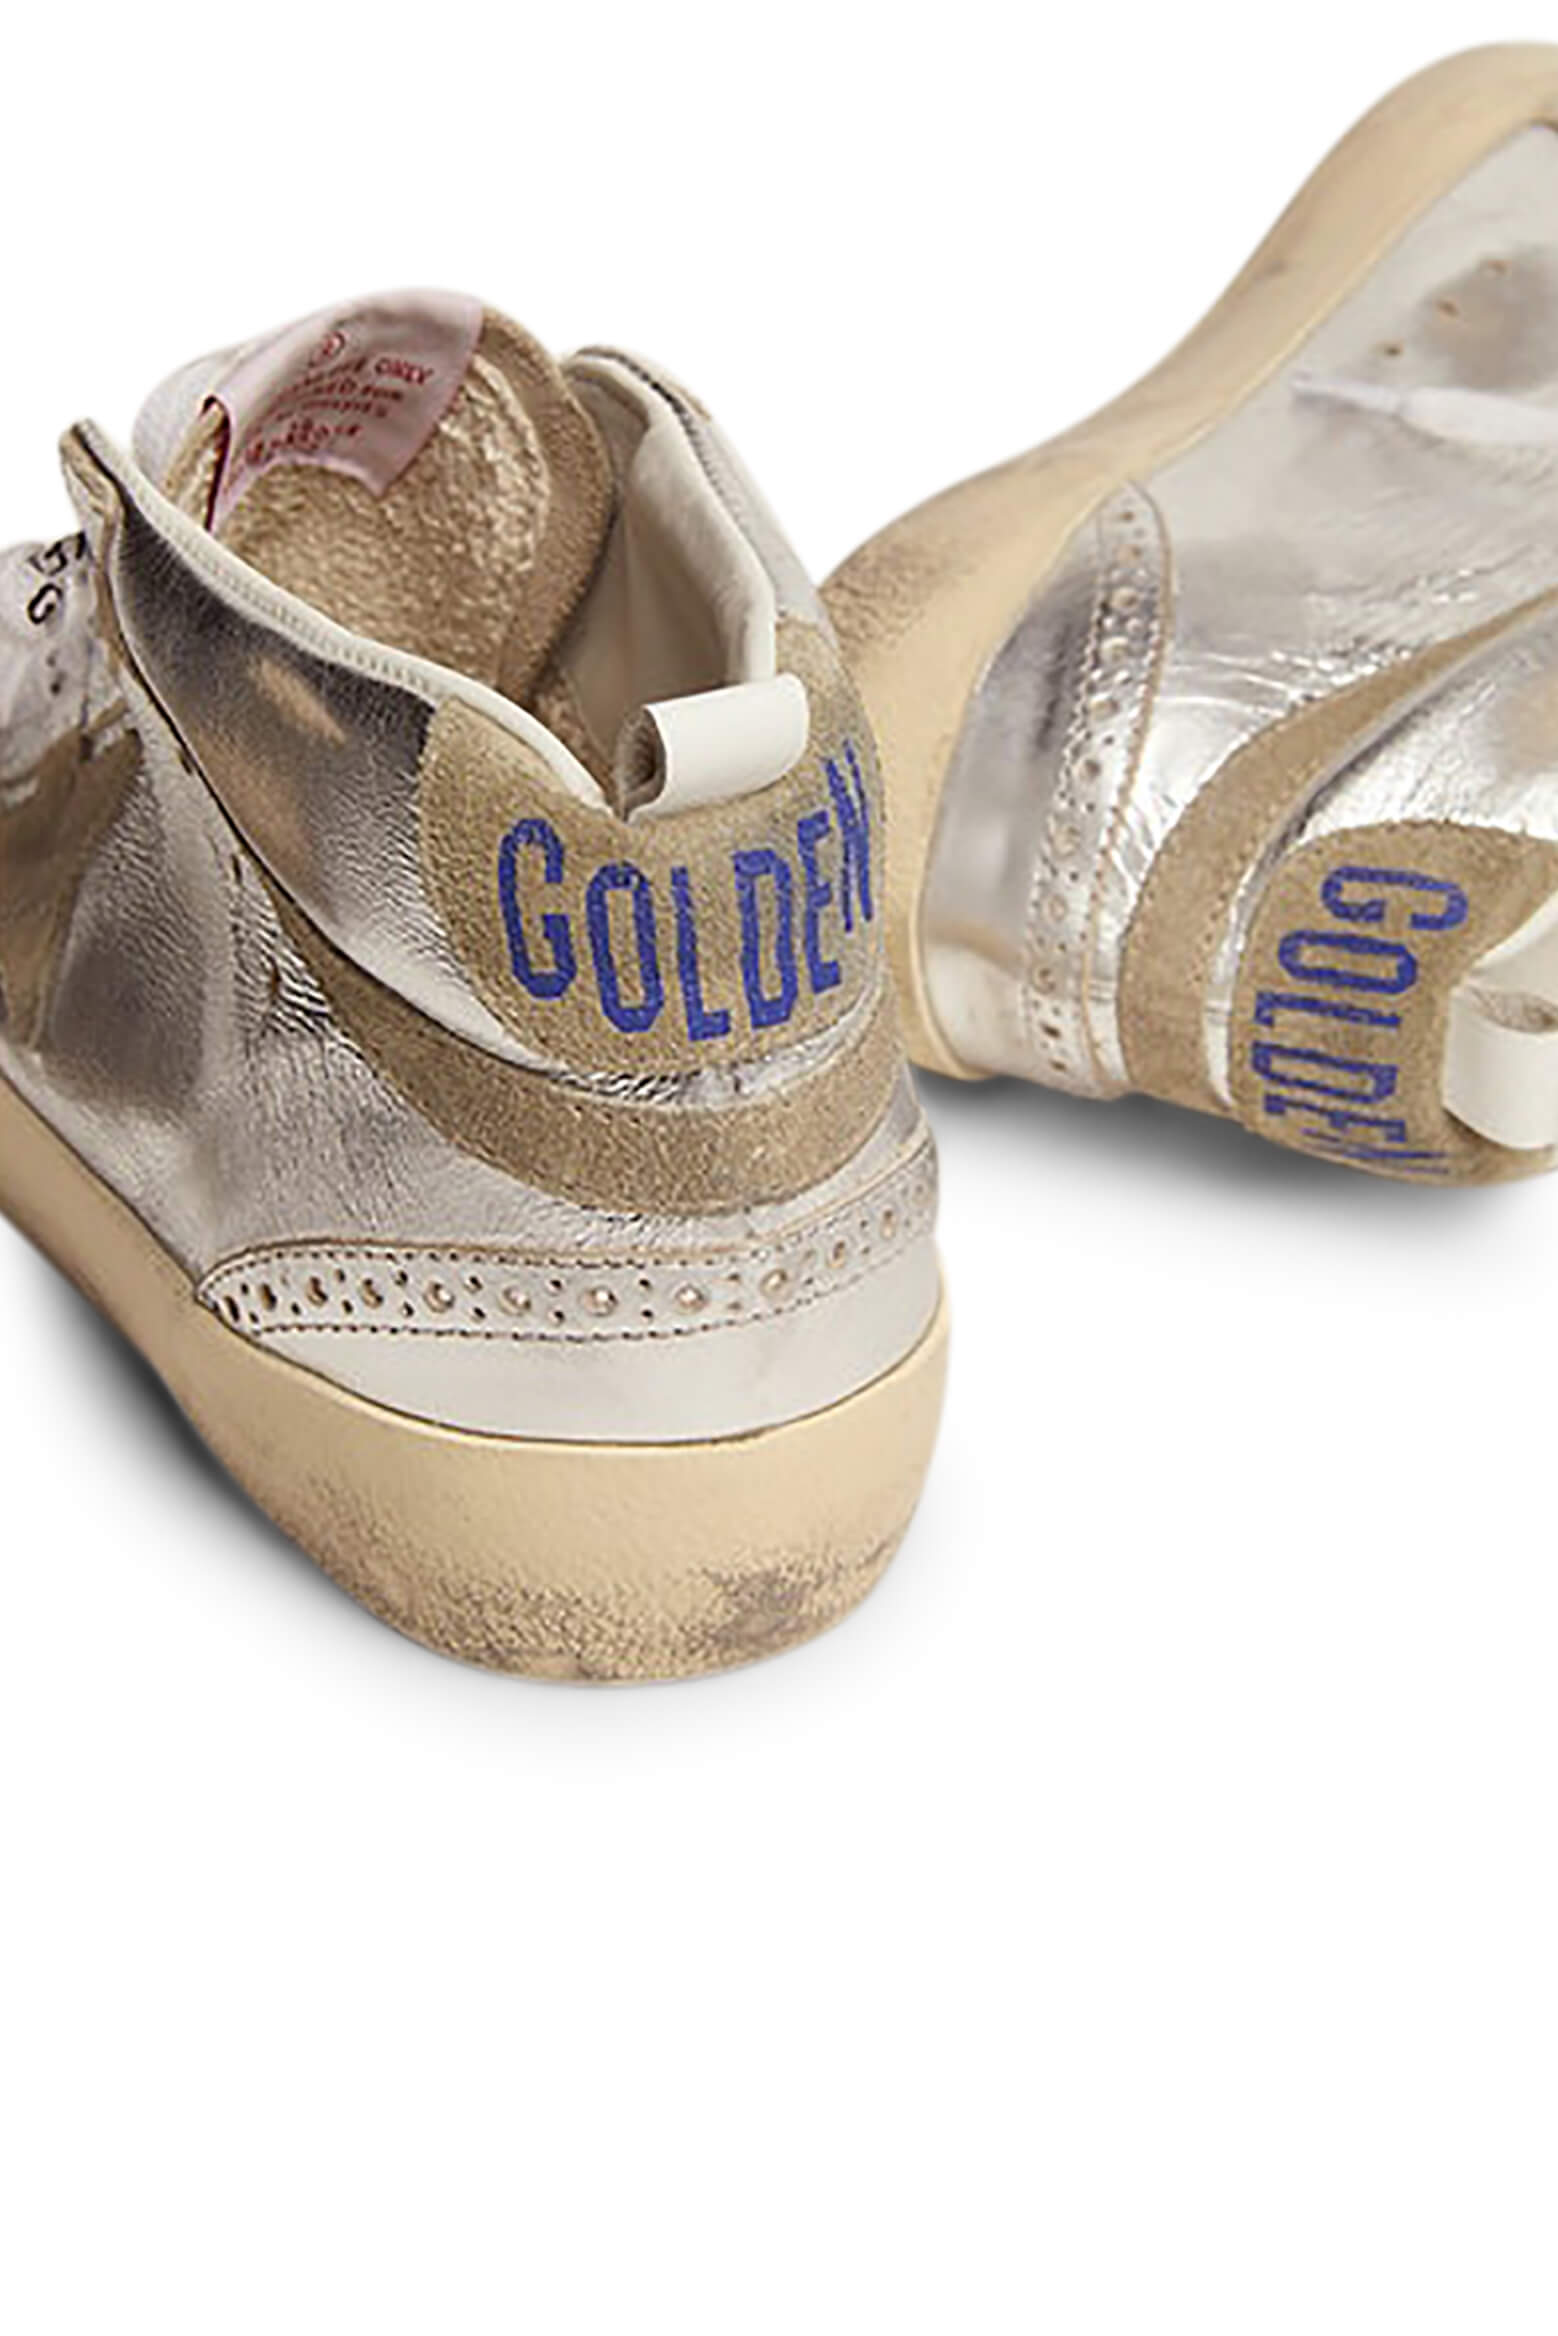 Golden Goose Mid Star Sneakers in Silver and Taupe from The New Trend